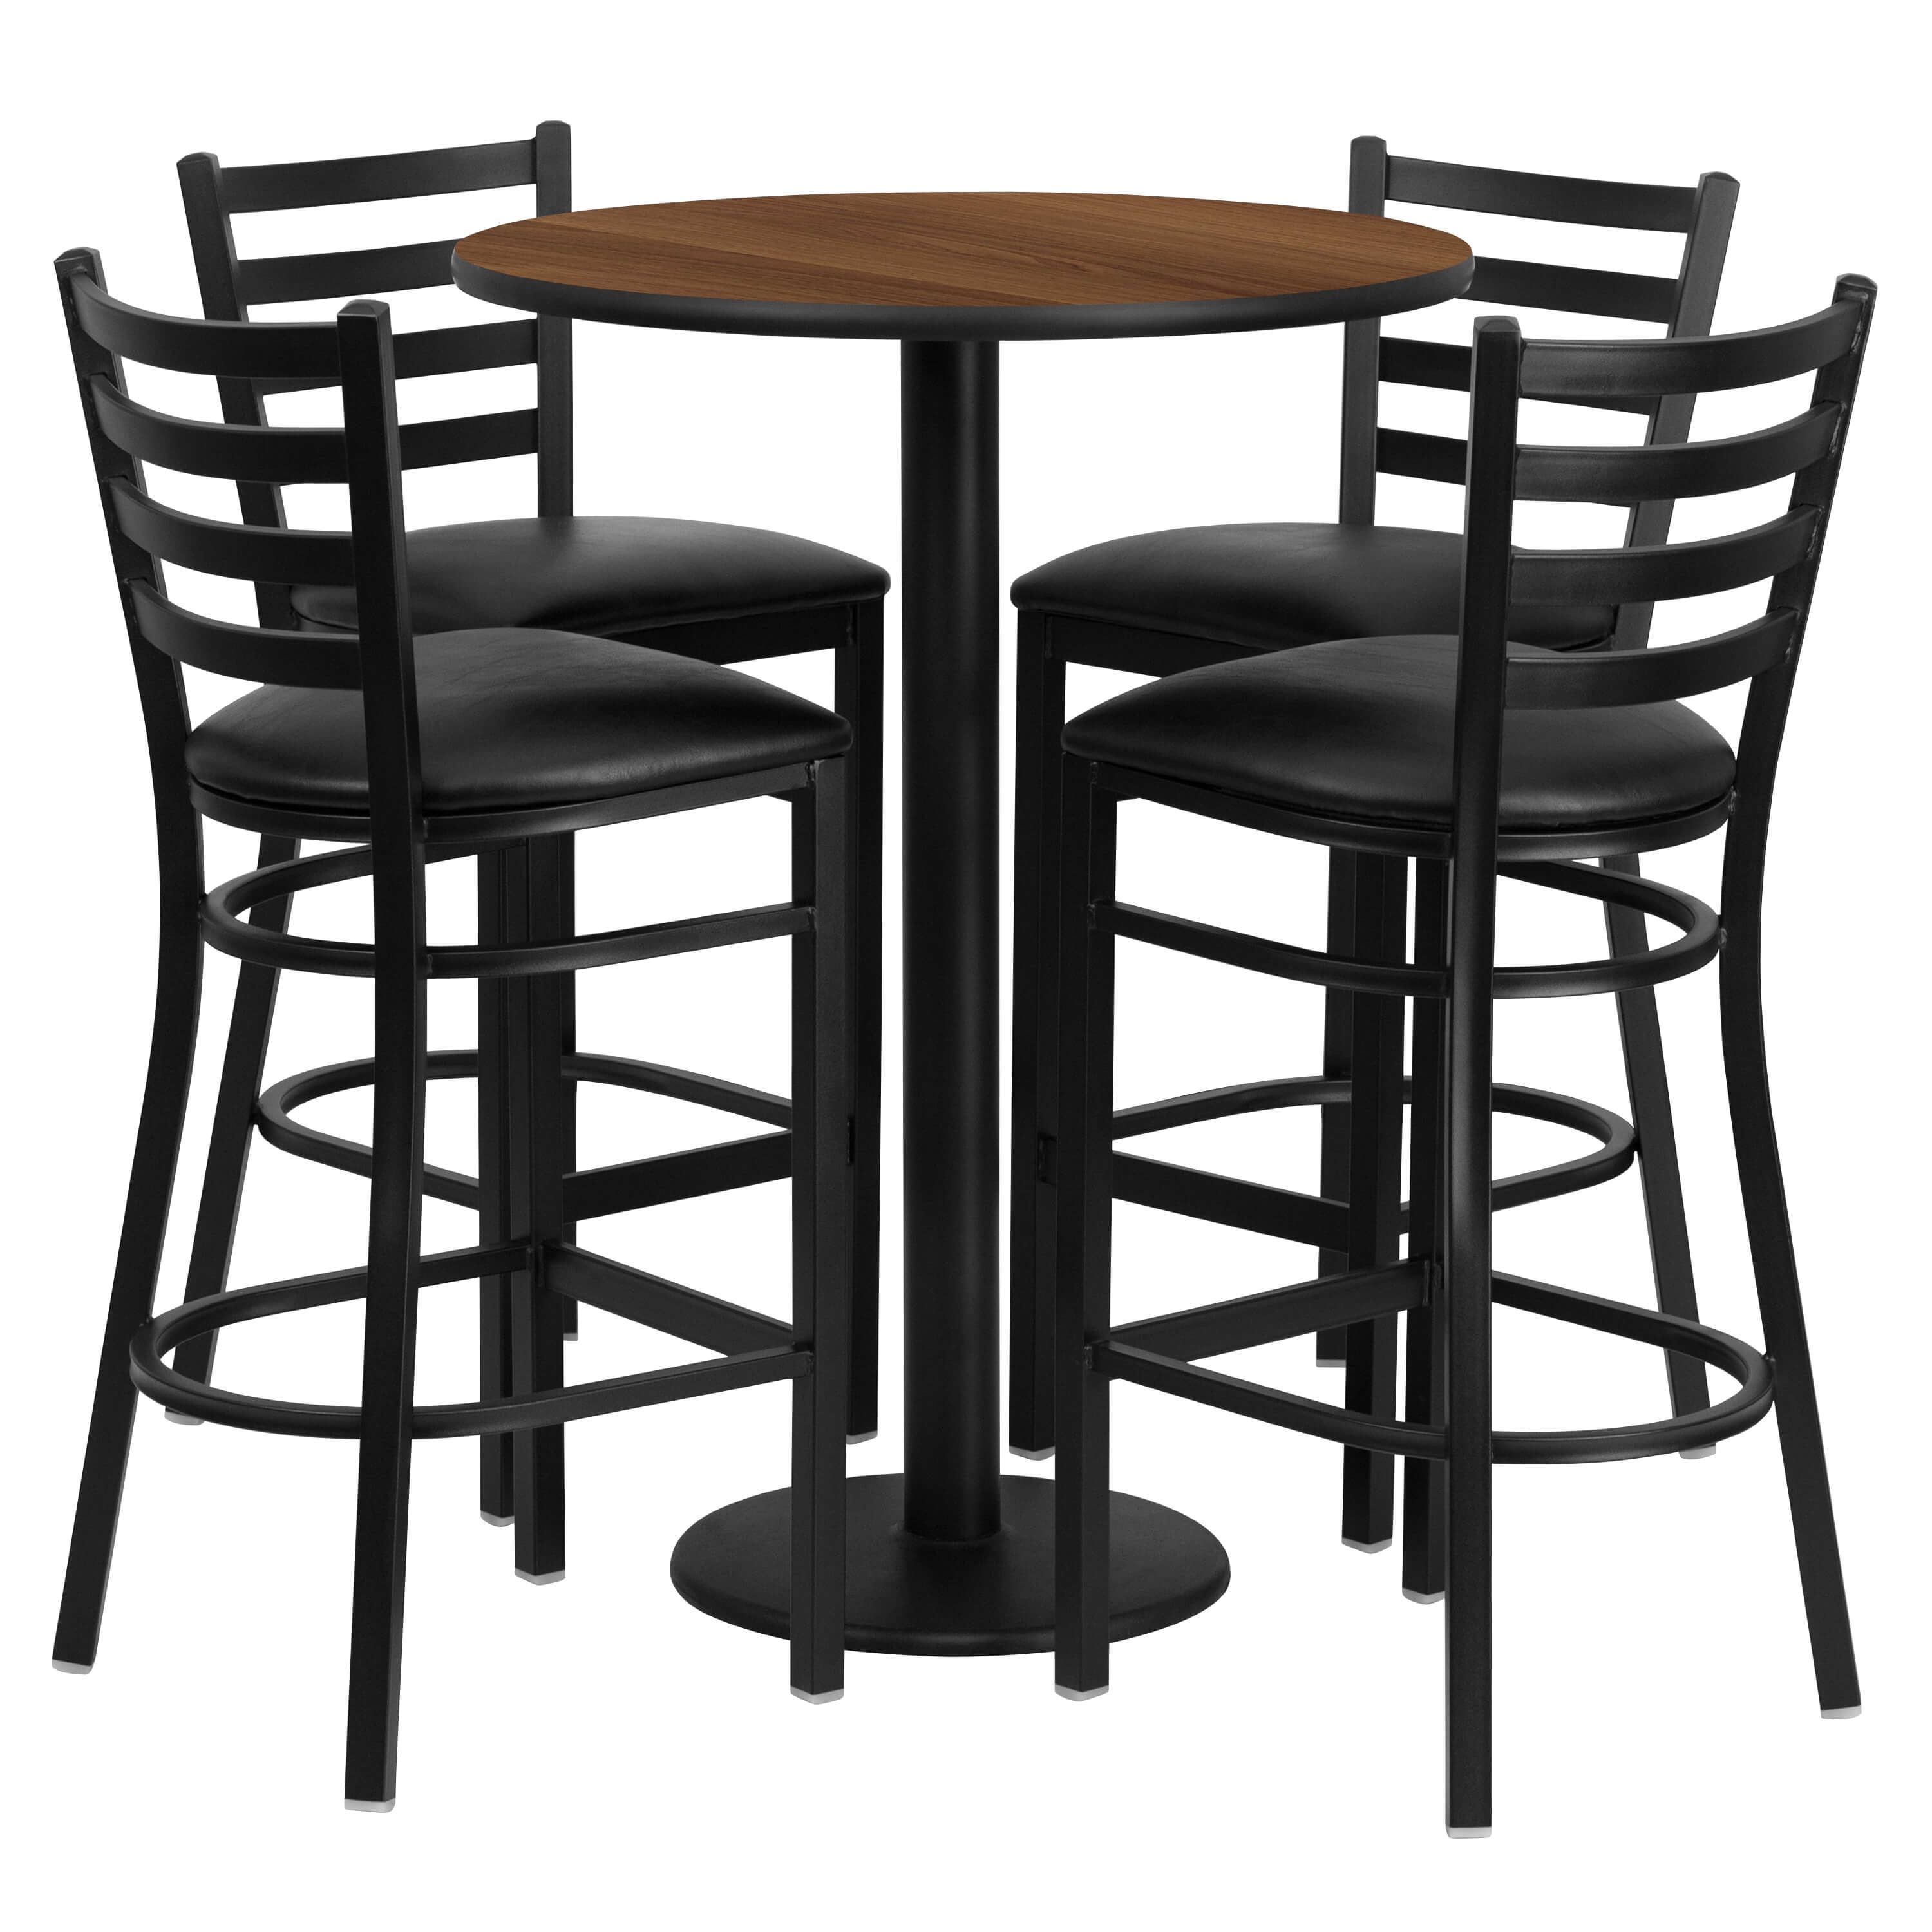 cafe-tables-and-chairs-30inch-round-pub-table-and-chairs-set.jpg